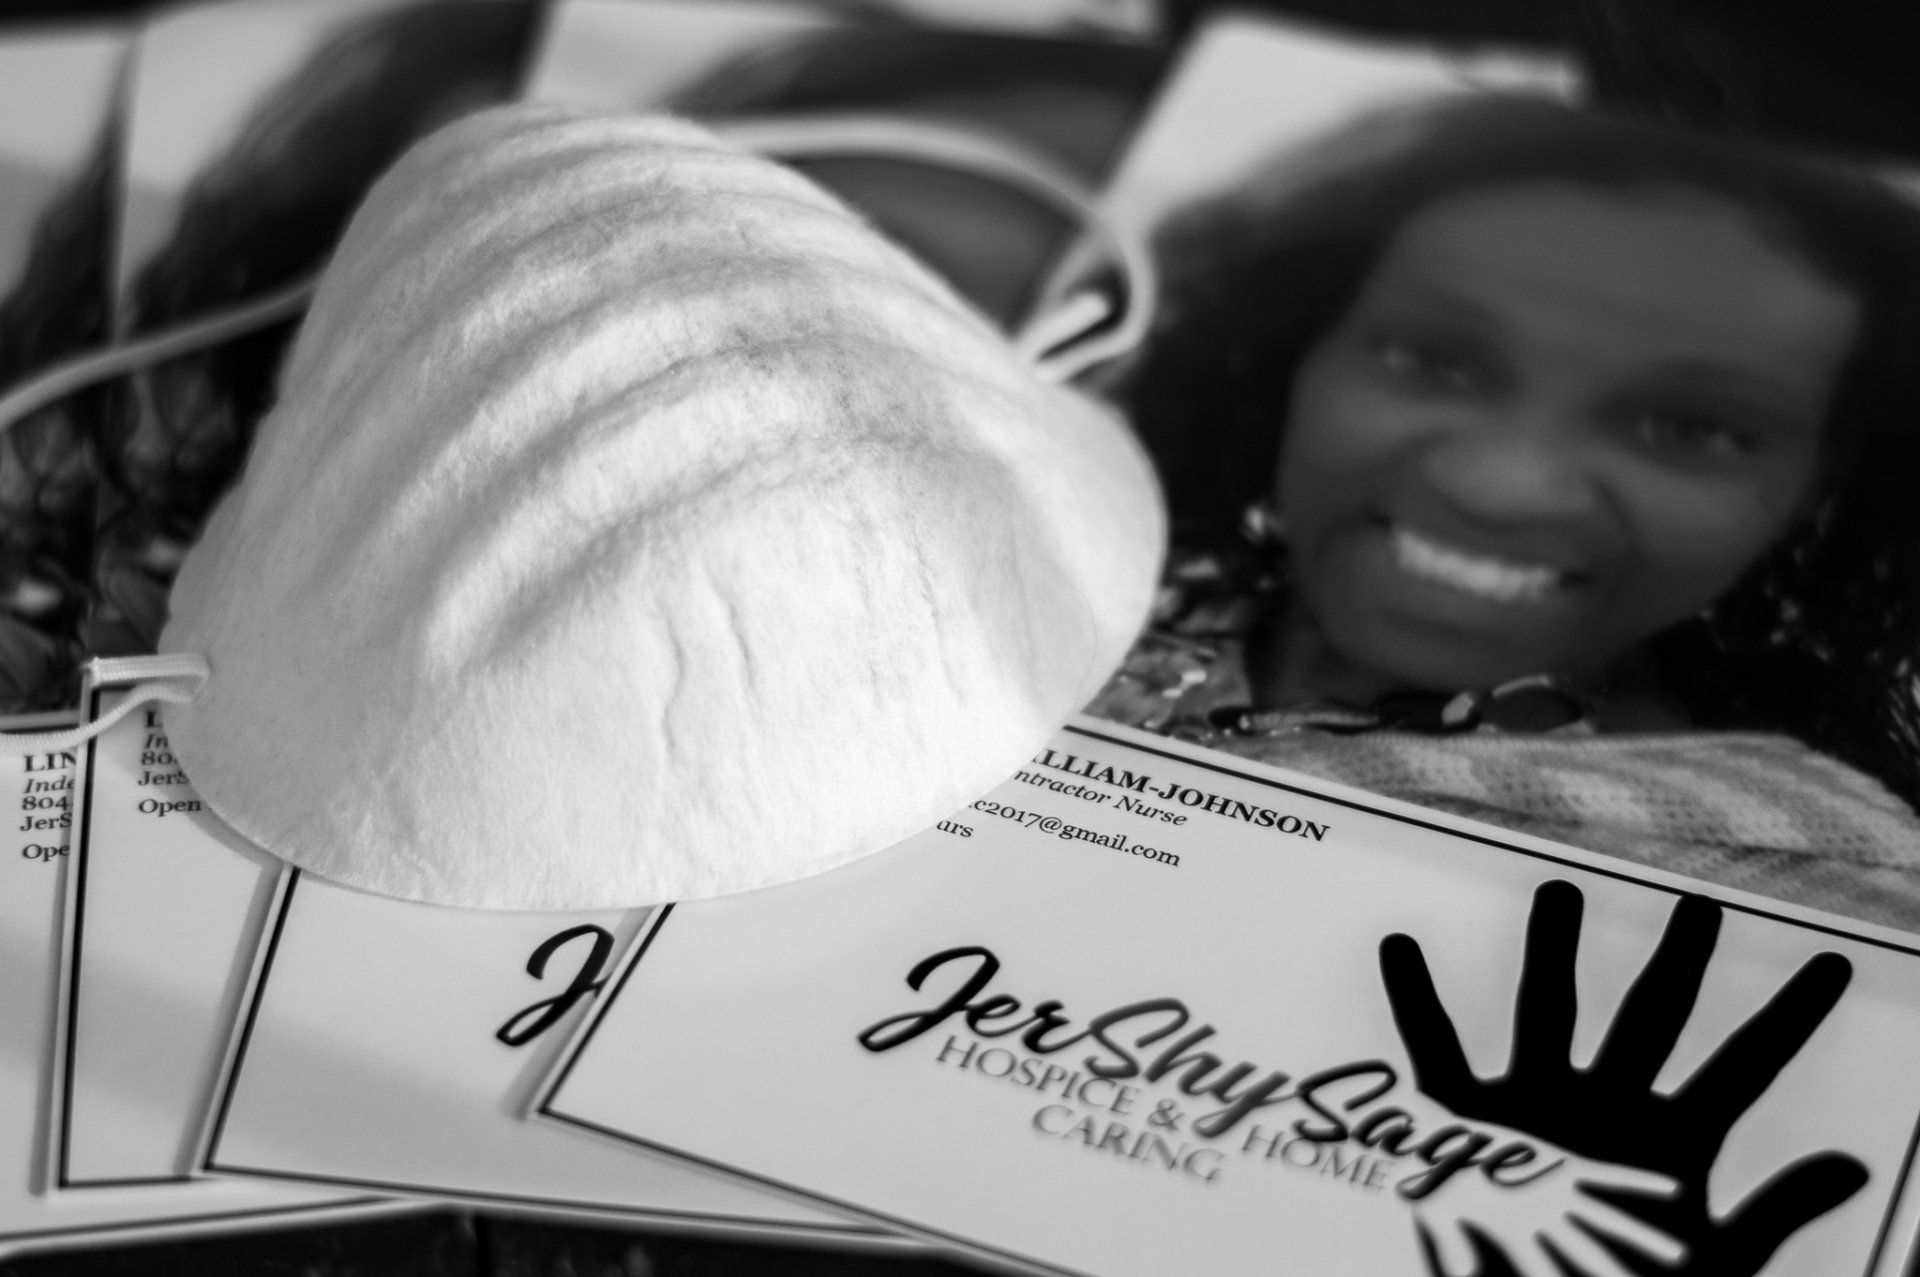 JerShySage business cards and face mask